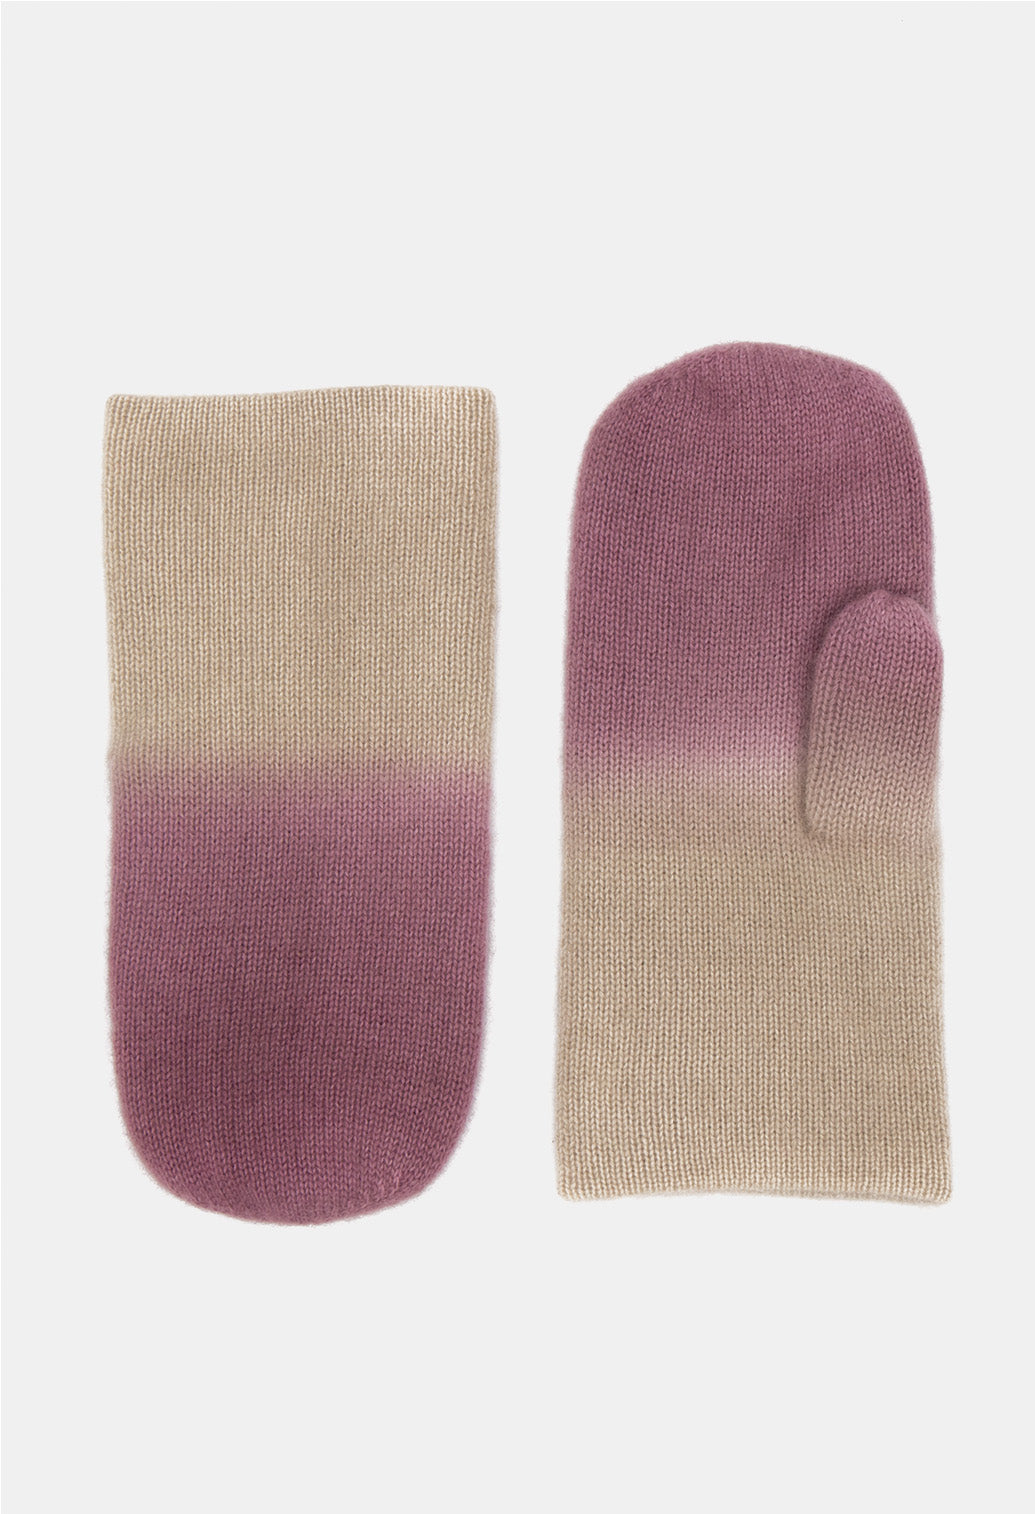 PAN MITTENS PLAZA TAUPE/ORCHID